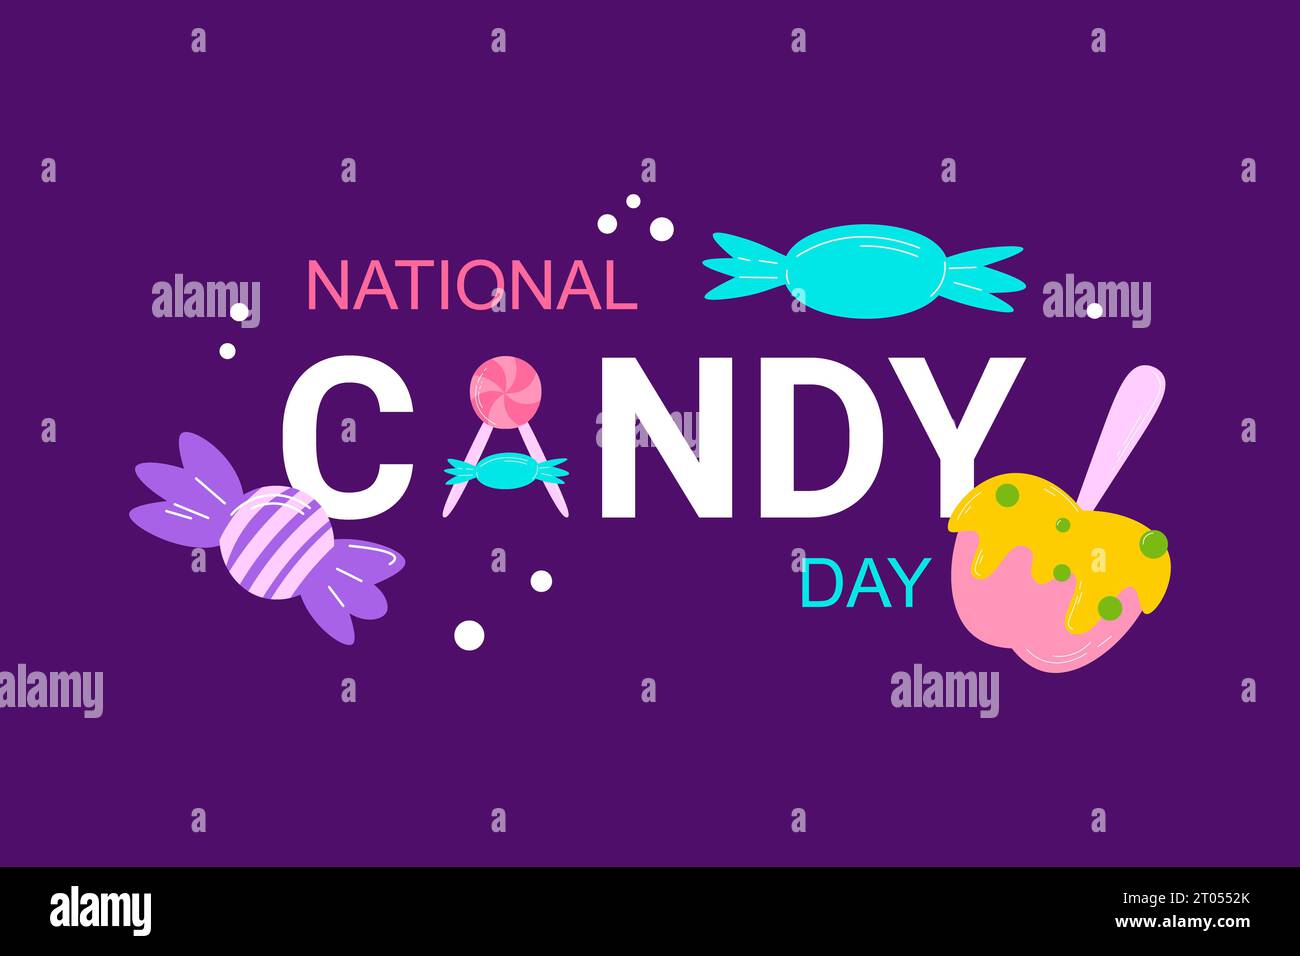 National Candy Day background. Food & Beverage. Vector illustration. Stock Photo